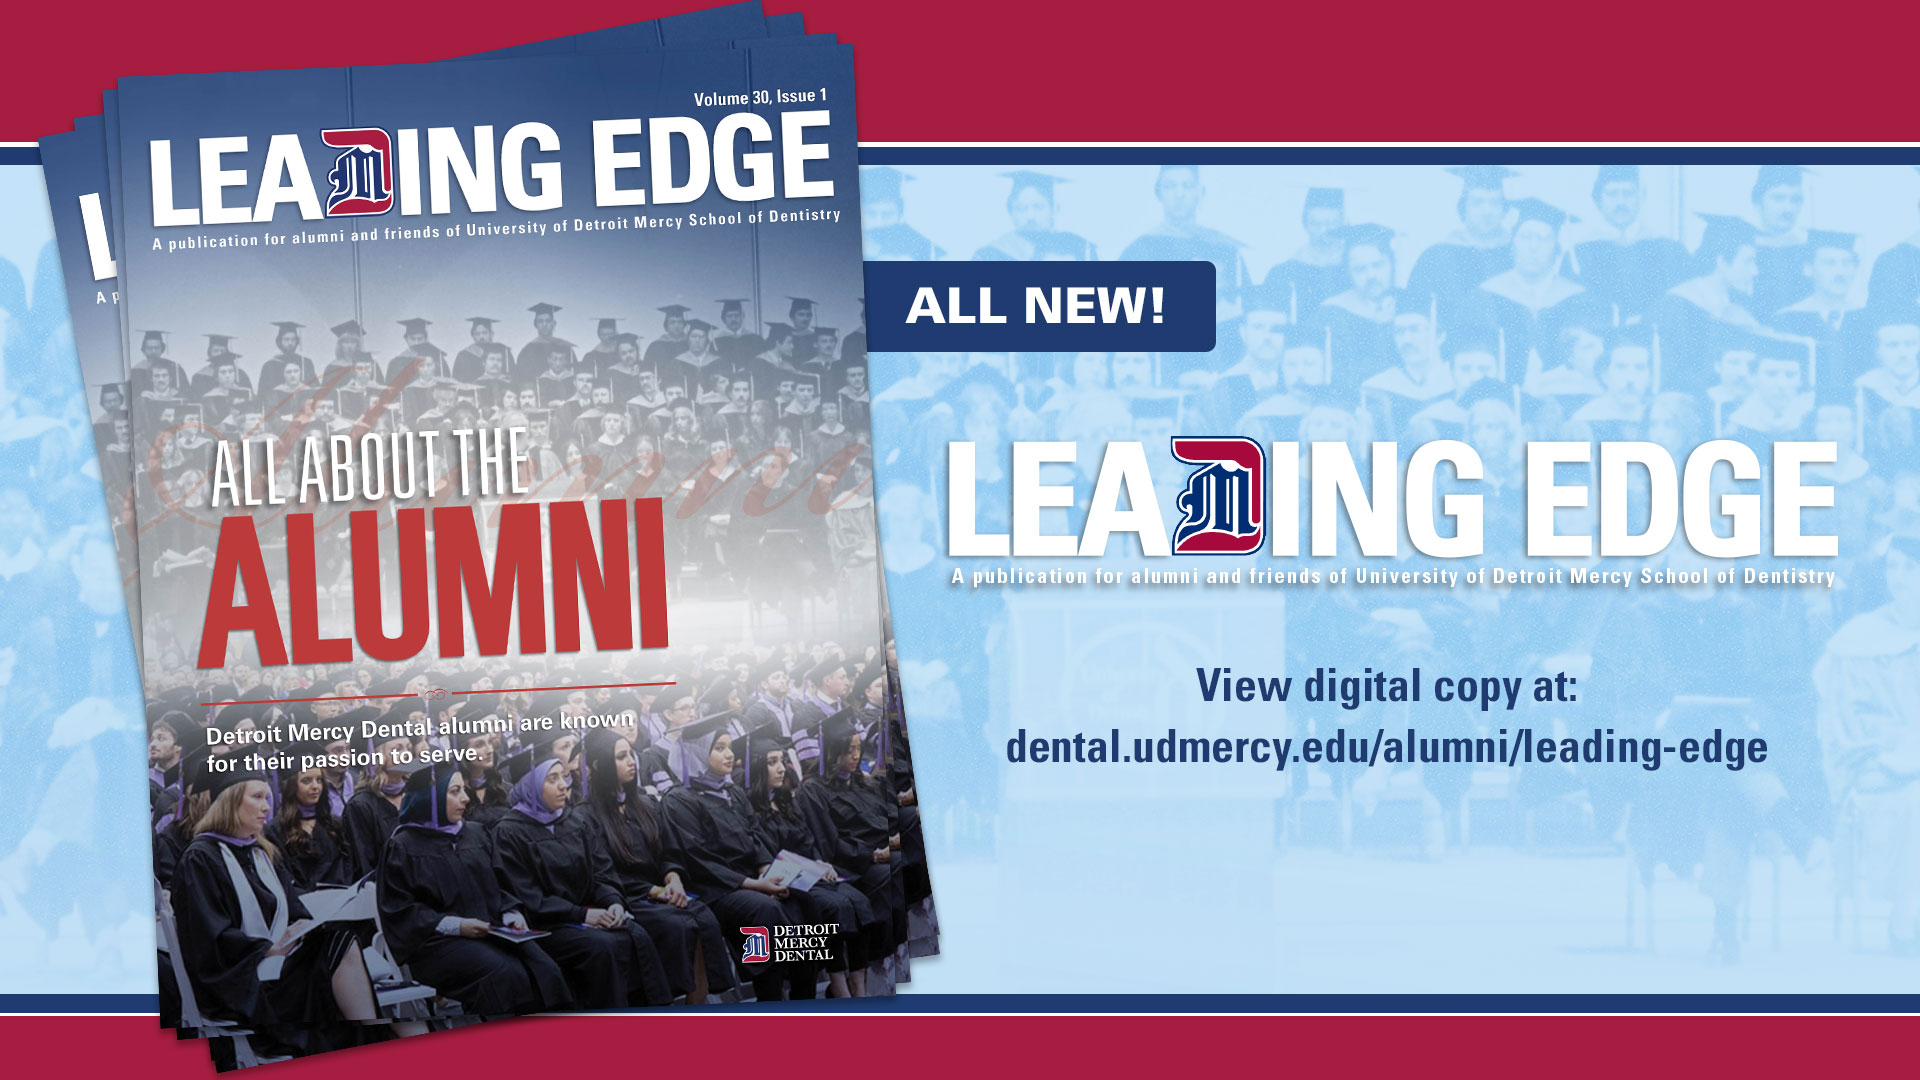 leading edge a publication for alumni and friends of university of detroit mercy school of dentistry view digital copy at dental.udmercy.edu/alumni/leading-edge